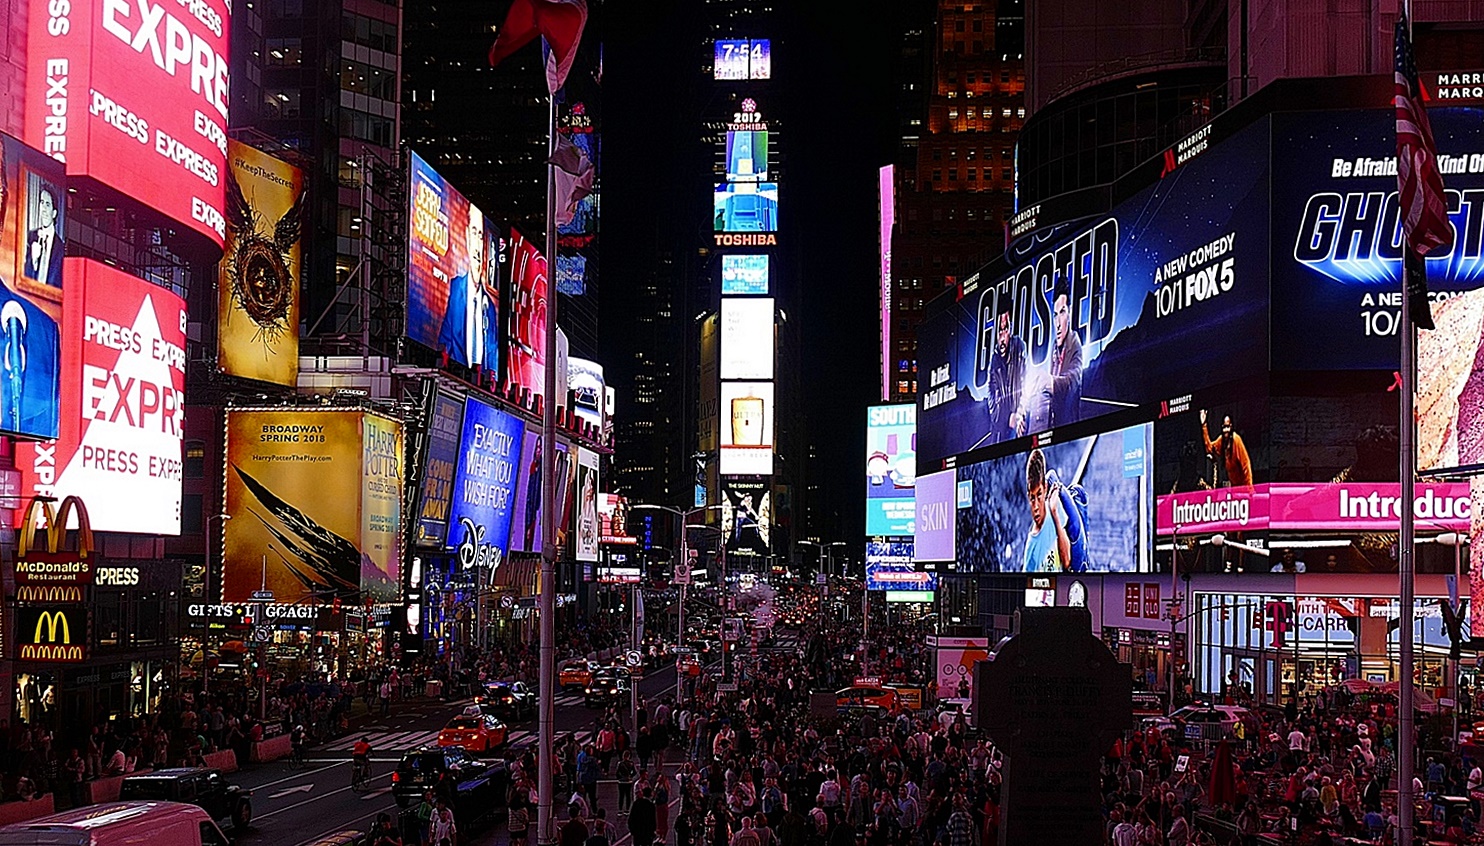 Time Square at Night!